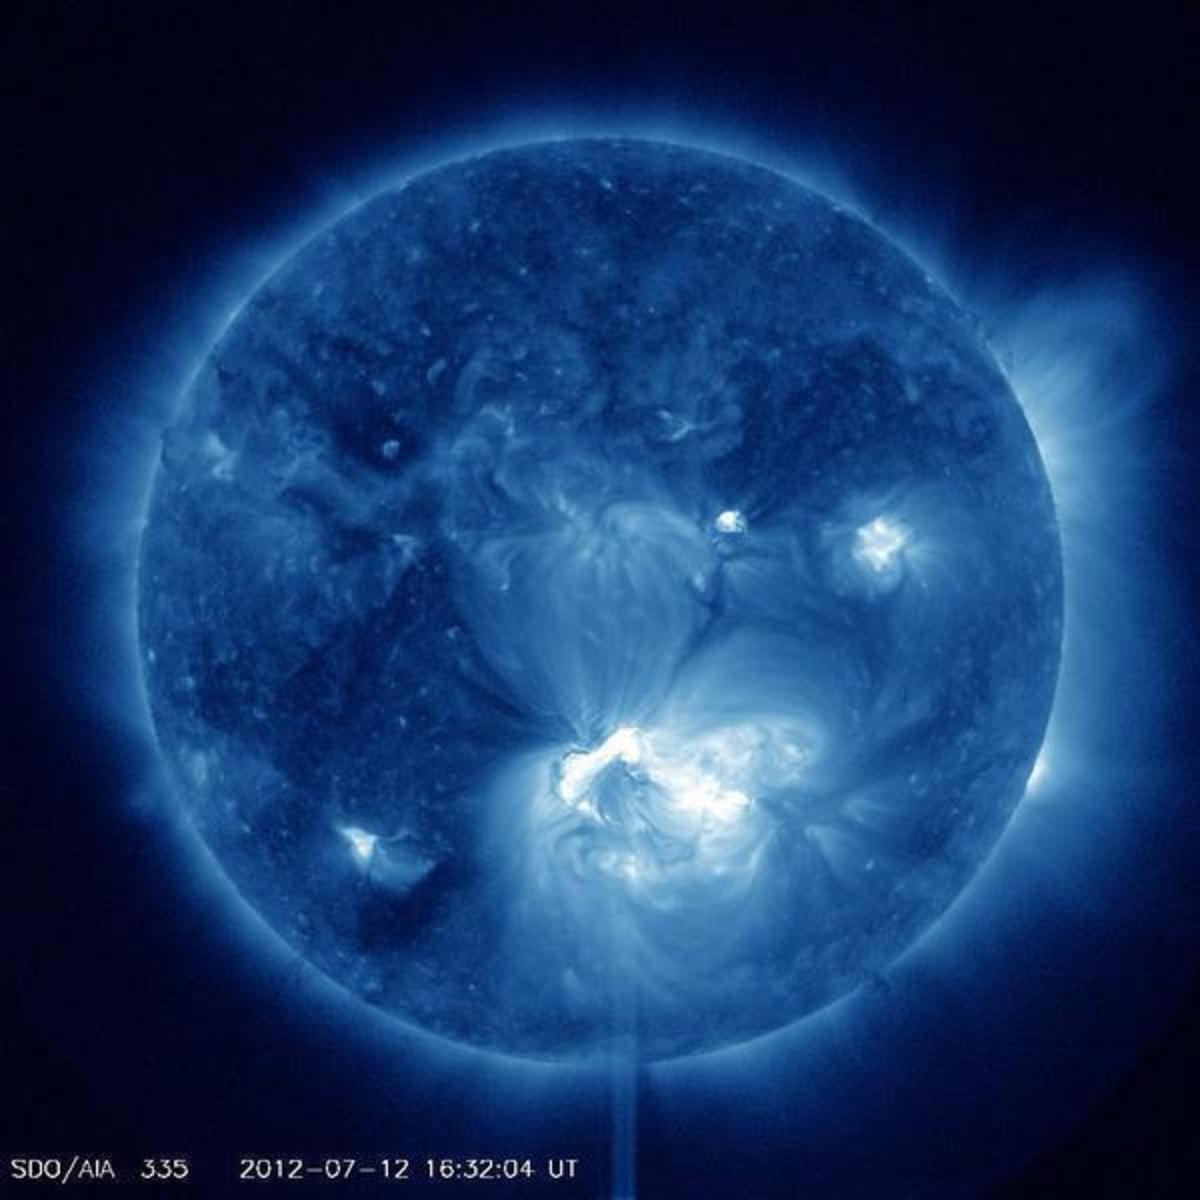 Will an increase in solar storms affect the Earth's ongoing climate change and polar shift?